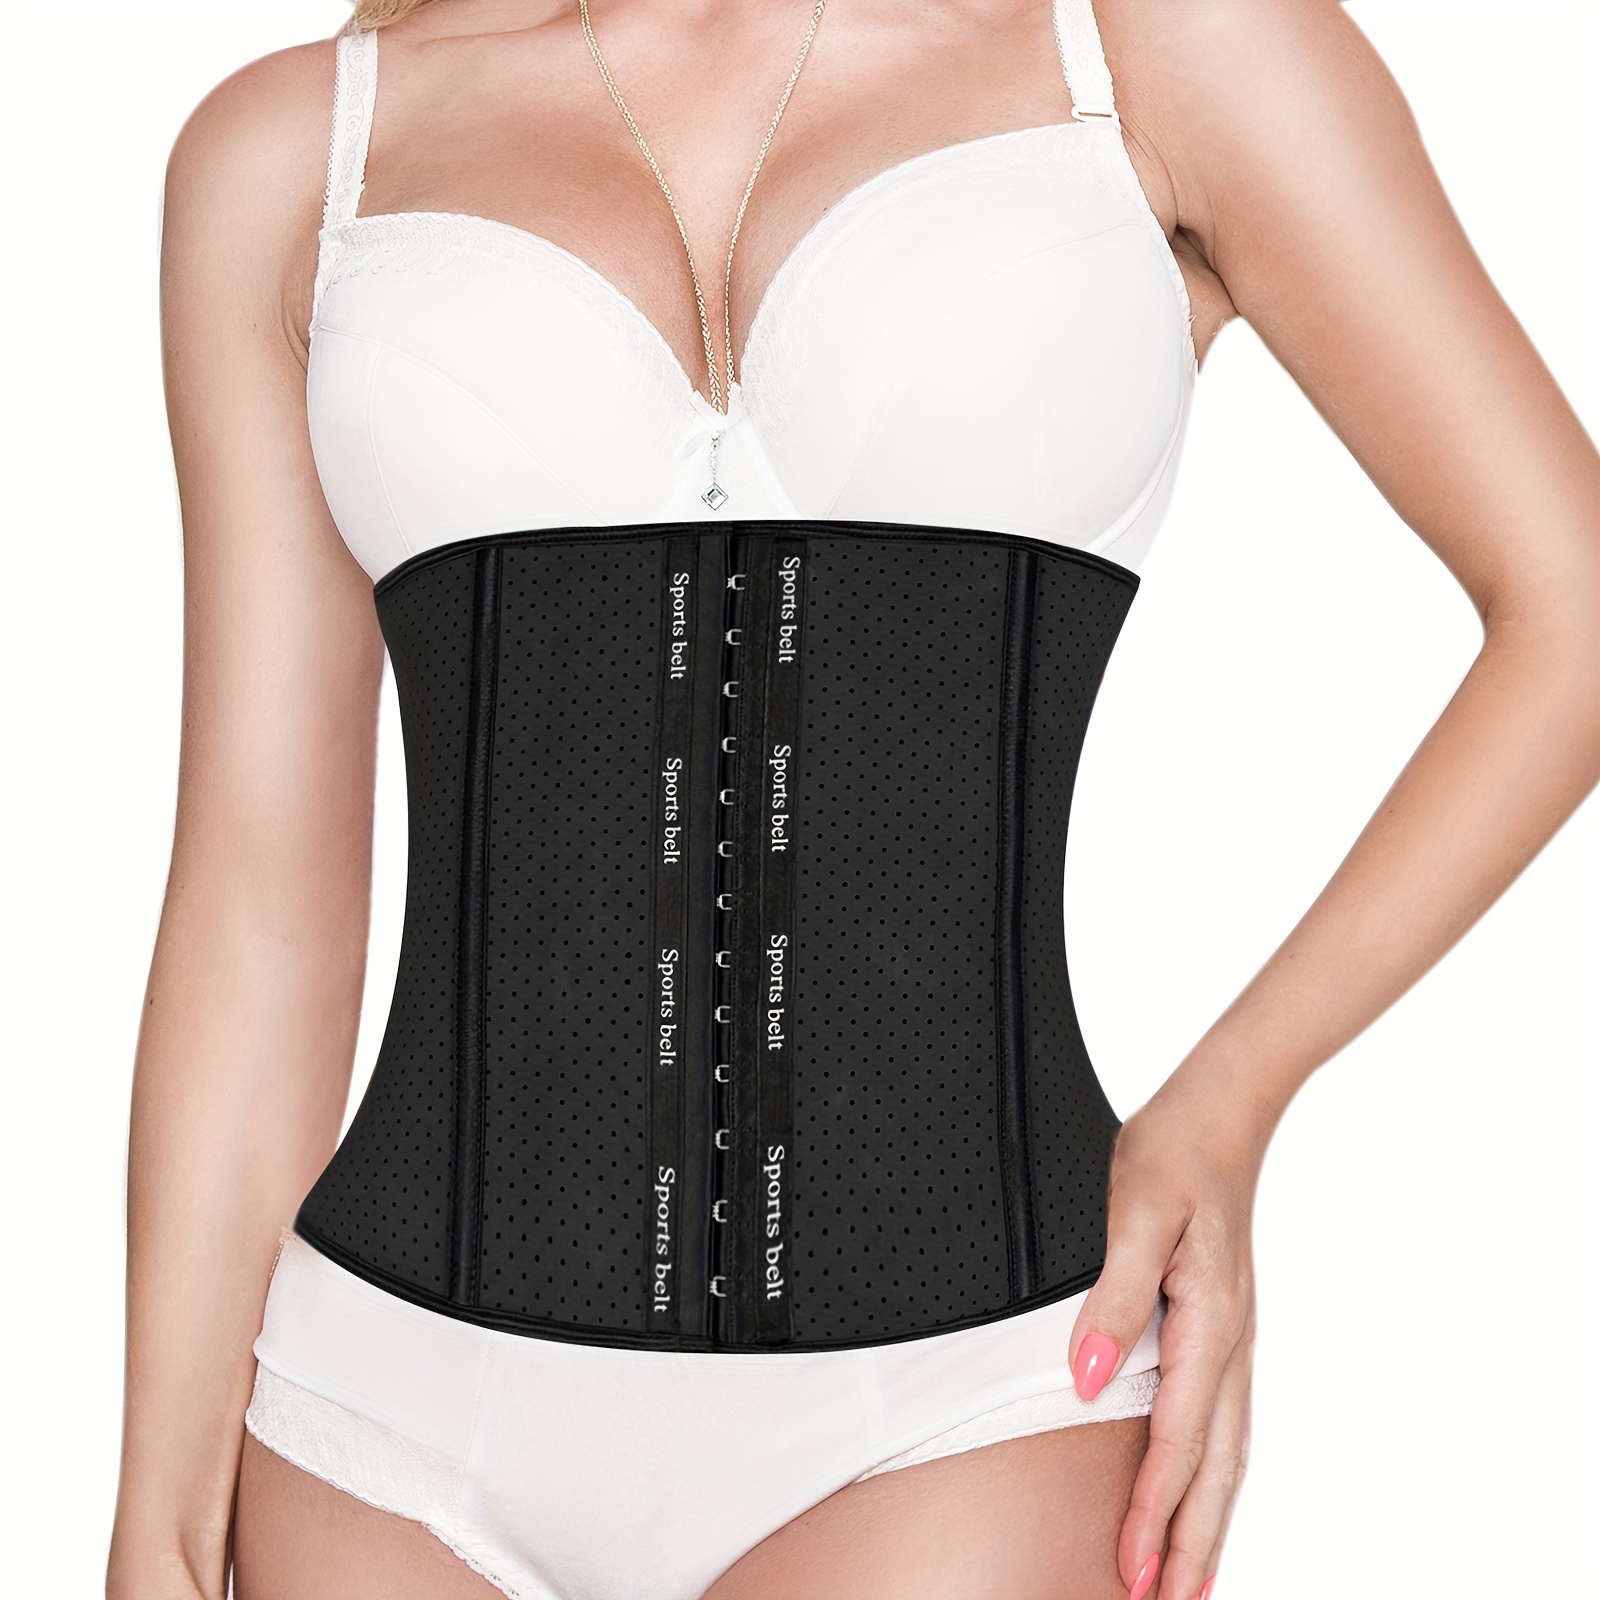 Abaadlw Waist Trainer for Women Lower Belly Fat - ShopStyle Lingerie